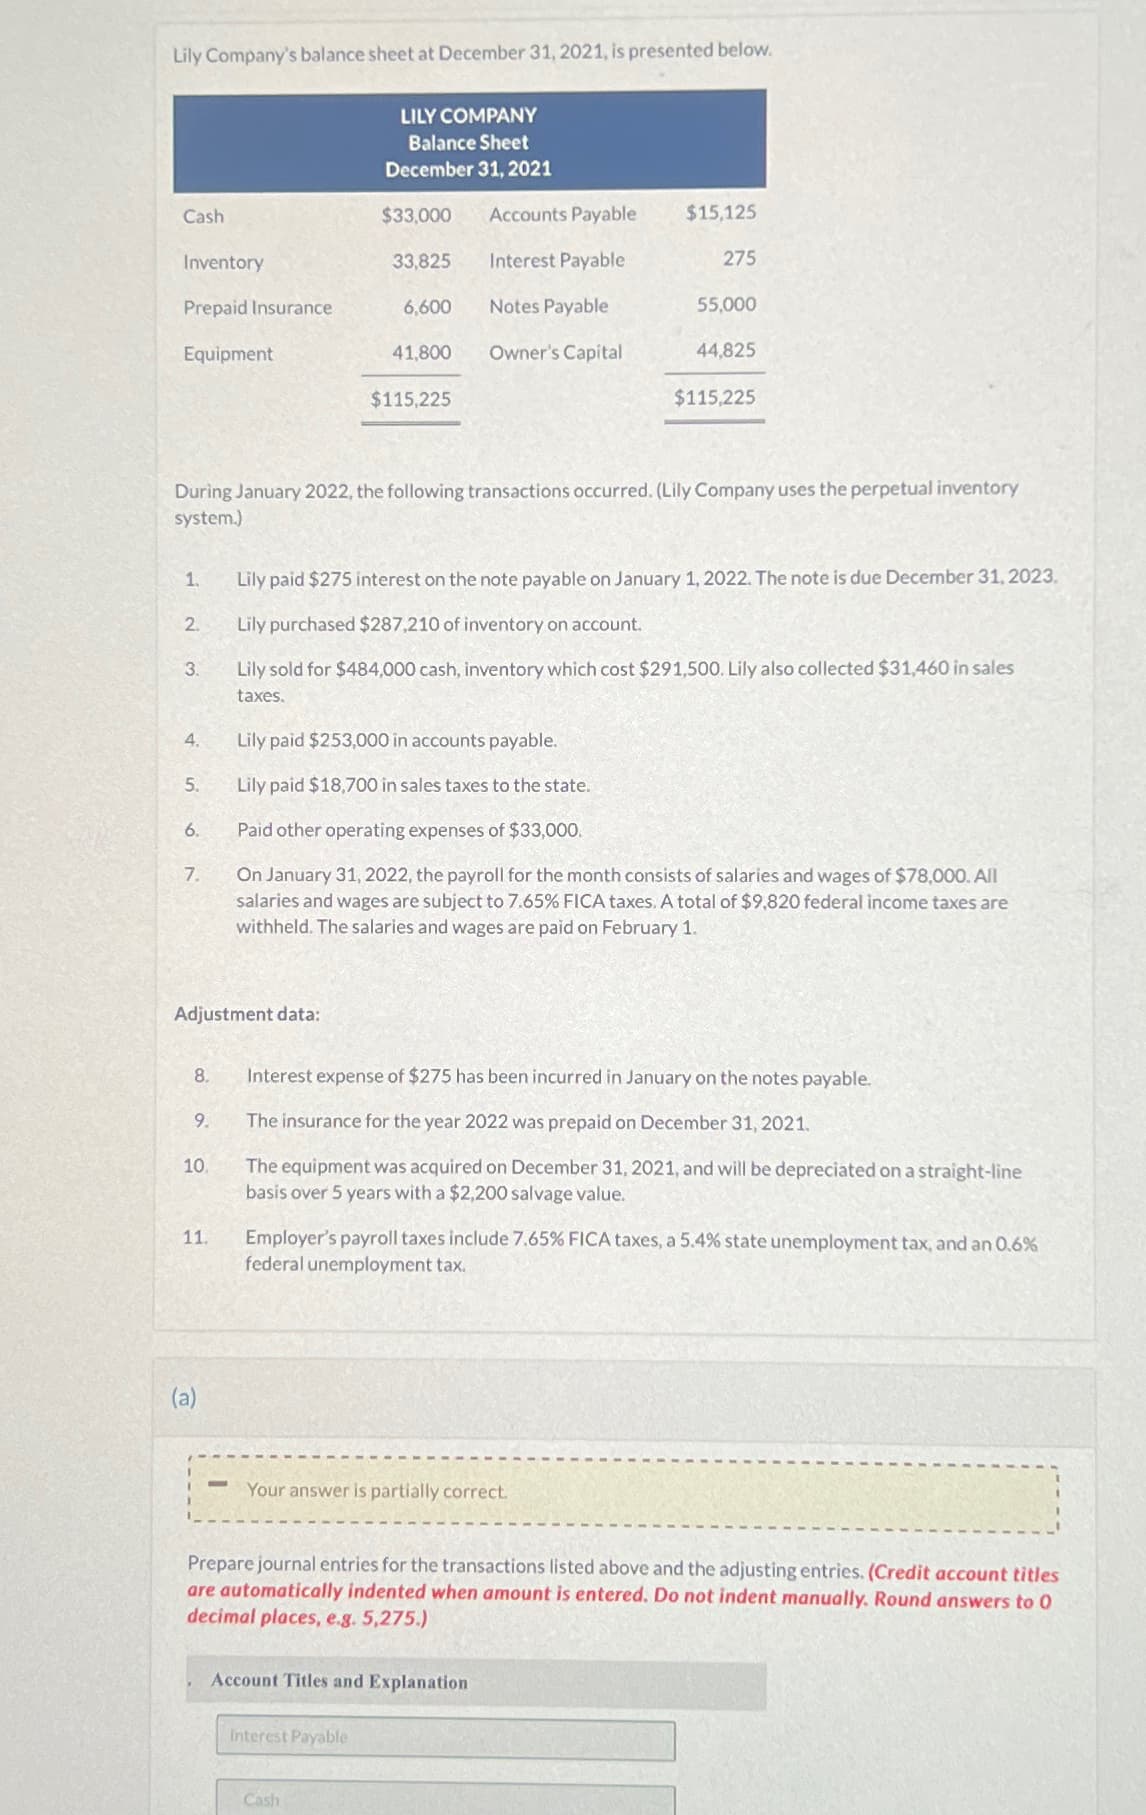 Lily Company's balance sheet at December 31, 2021, is presented below.
LILY COMPANY
Balance Sheet
December 31, 2021
Cash
$33,000
Accounts Payable
$15,125
Inventory
33,825
Interest Payable
275
Prepaid Insurance
6,600
Notes Payable
55,000
Equipment
41,800
Owner's Capital
44,825
$115,225
$115,225
During January 2022, the following transactions occurred. (Lily Company uses the perpetual inventory
system.)
1.
2.
Lily paid $275 interest on the note payable on January 1, 2022. The note is due December 31, 2023.
Lily purchased $287,210 of inventory on account.
3.
Lily sold for $484,000 cash, inventory which cost $291,500. Lily also collected $31,460 in sales
taxes.
4.
Lily paid $253,000 in accounts payable.
5.
Lily paid $18,700 in sales taxes to the state.
6.
Paid other operating expenses of $33,000.
7.
On January 31, 2022, the payroll for the month consists of salaries and wages of $78,000. All
salaries and wages are subject to 7.65% FICA taxes. A total of $9,820 federal income taxes are
withheld. The salaries and wages are paid on February 1.
Adjustment data:
8. Interest expense of $275 has been incurred in January on the notes payable.
9.
The insurance for the year 2022 was prepaid on December 31, 2021.
10.
11.
The equipment was acquired on December 31, 2021, and will be depreciated on a straight-line
basis over 5 years with a $2,200 salvage value.
Employer's payroll taxes include 7.65% FICA taxes, a 5.4% state unemployment tax, and an 0.6%
federal unemployment tax.
(a)
Your answer is partially correct.
Prepare journal entries for the transactions listed above and the adjusting entries. (Credit account titles
are automatically indented when amount is entered. Do not indent manually. Round answers to 0
decimal places, e.g. 5,275.)
Account Titles and Explanation
Interest Payable
Cash